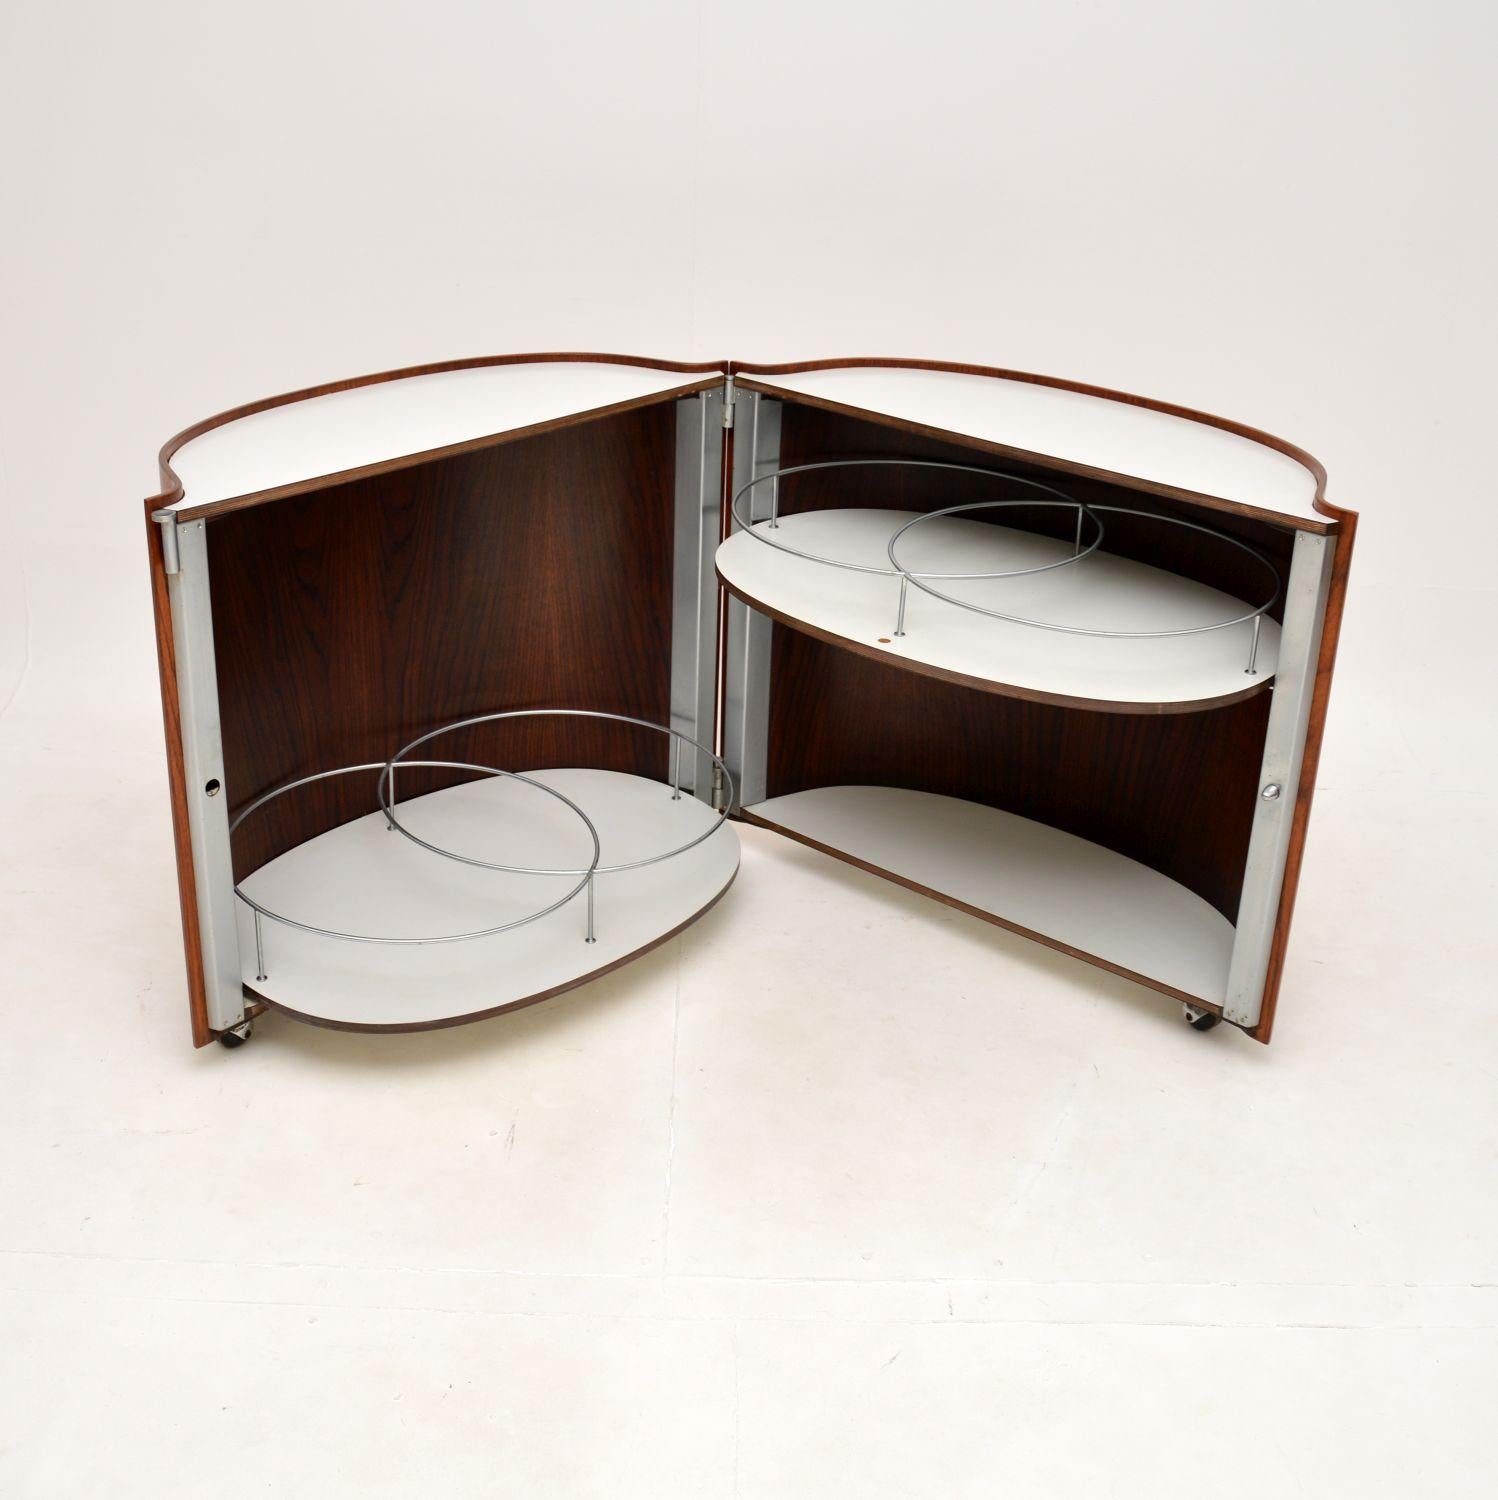 Mid-20th Century Vintage Italian Drinks Cabinet by Eugenio Gerli for Tecno For Sale